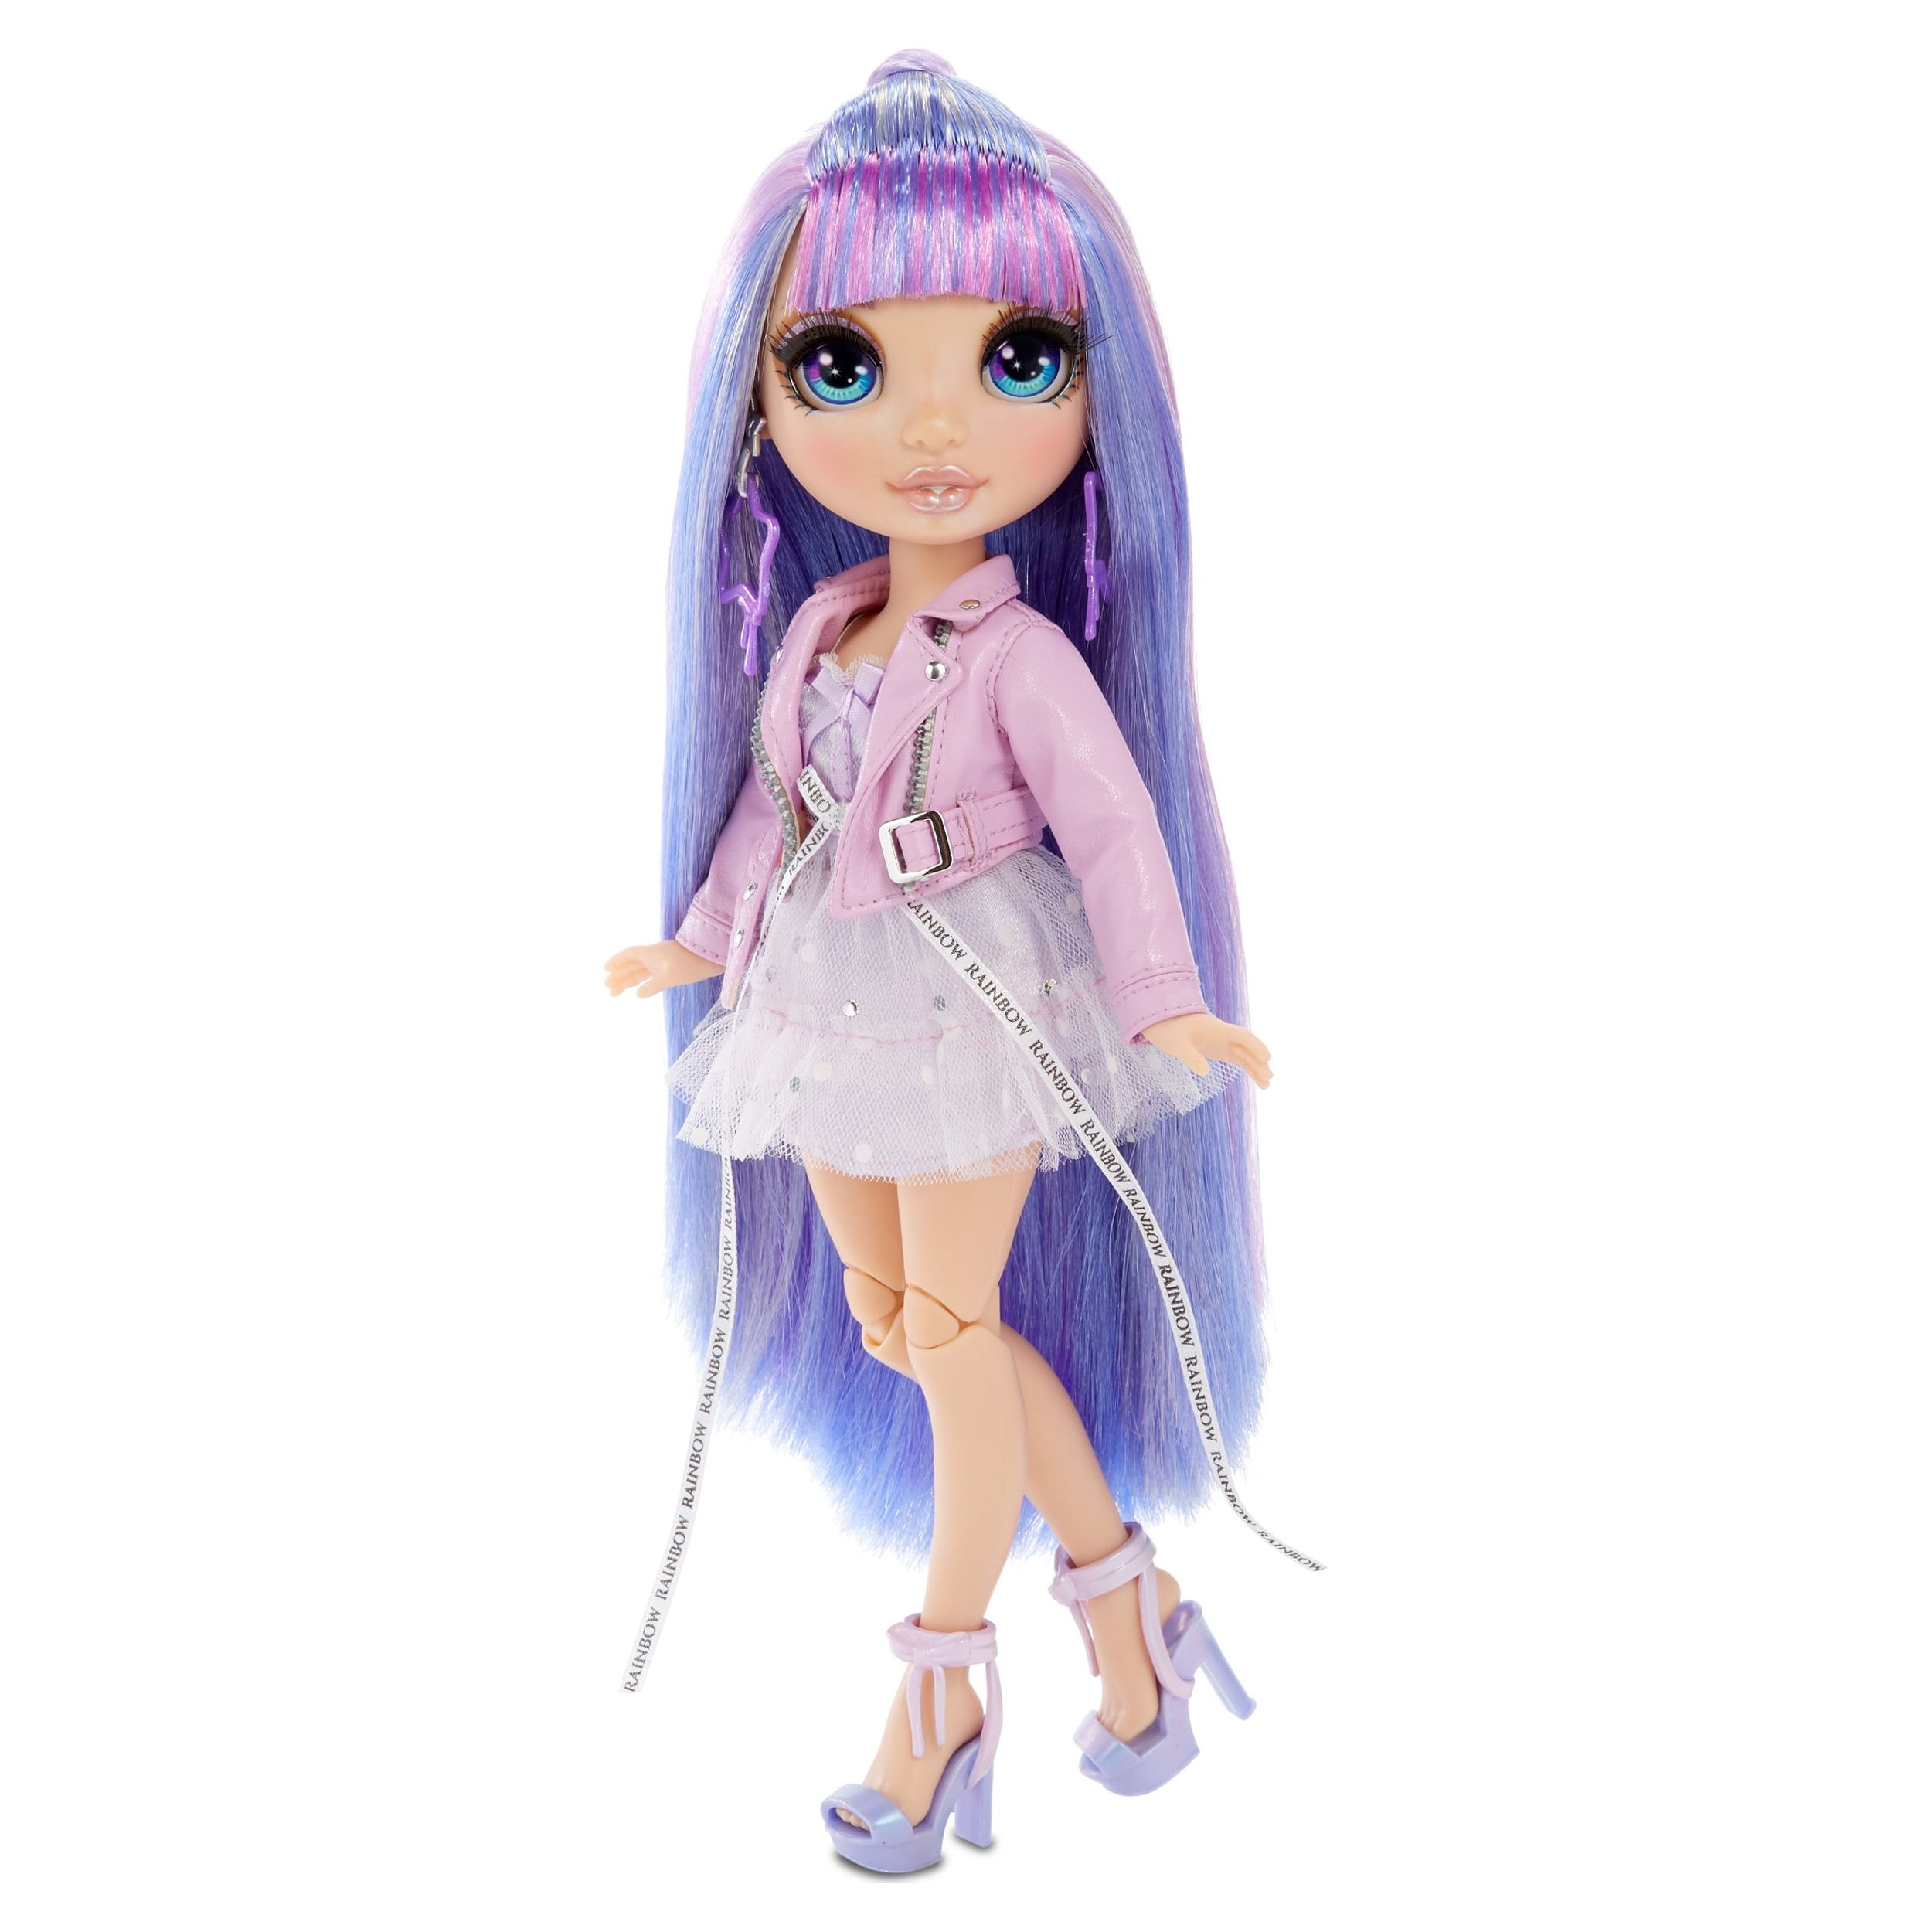 Rainbow High Violet Willow – Purple Fashion Doll with 2 Outfits - image 5 of 8